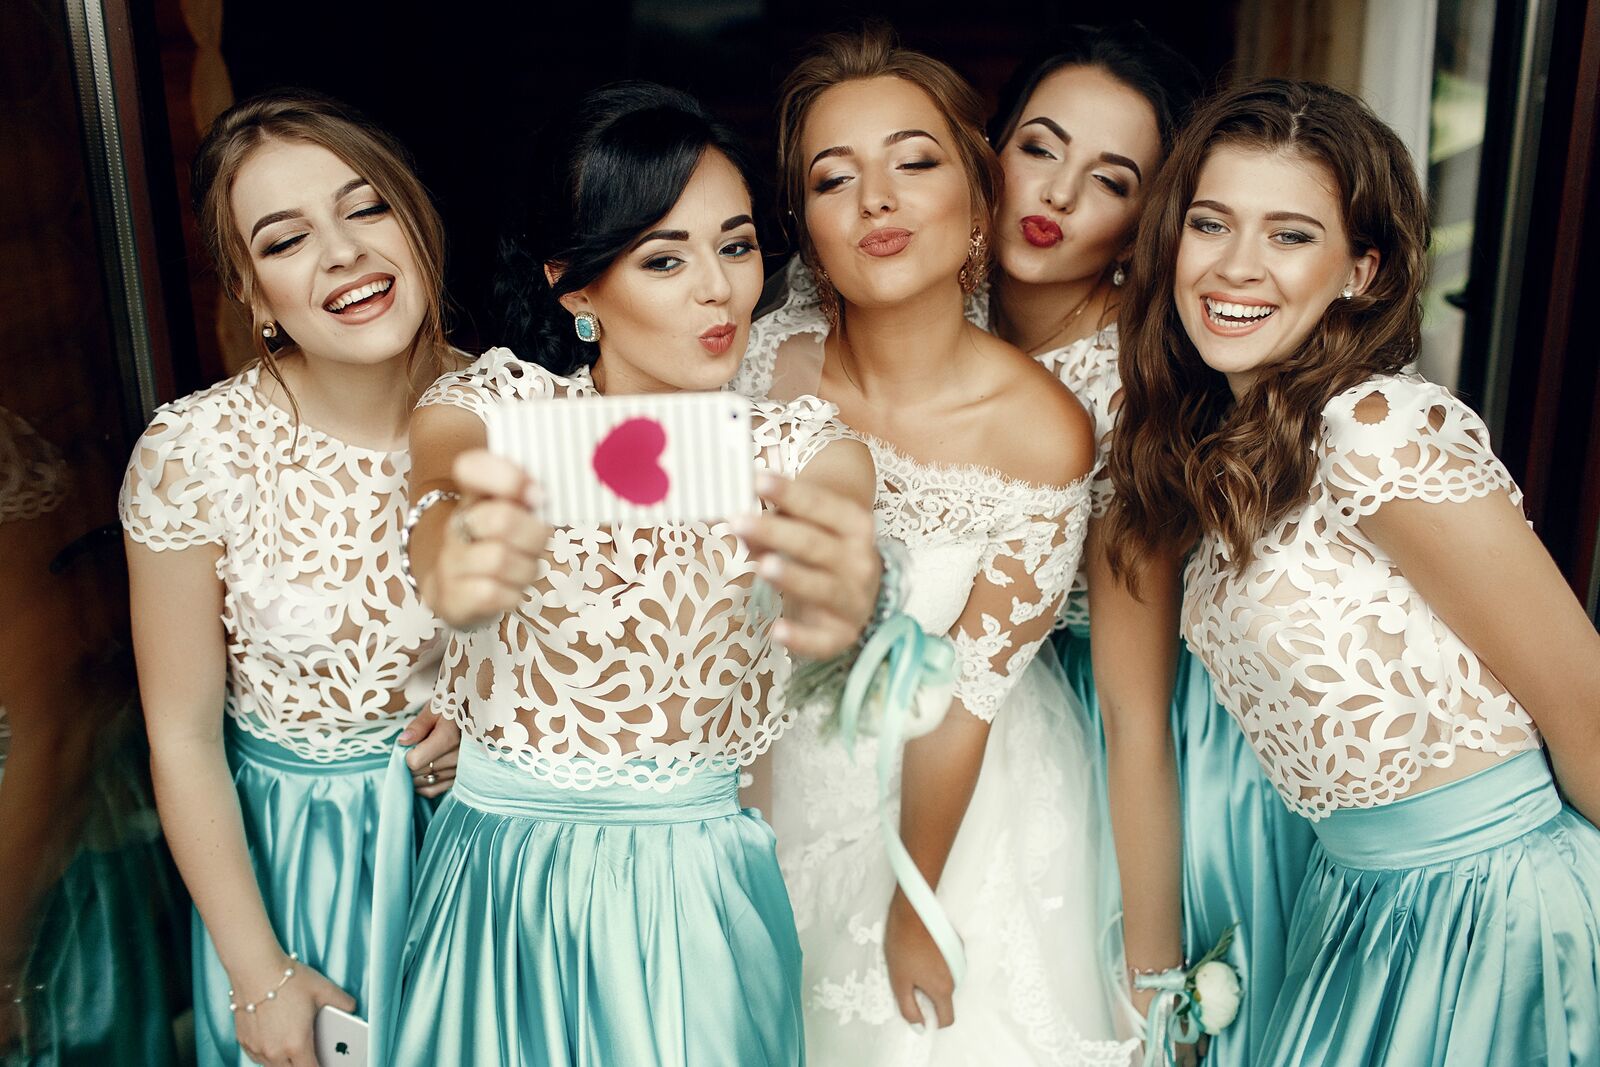 Should we - as Wedding Suppliers - embrace social media at weddings or discourage it?